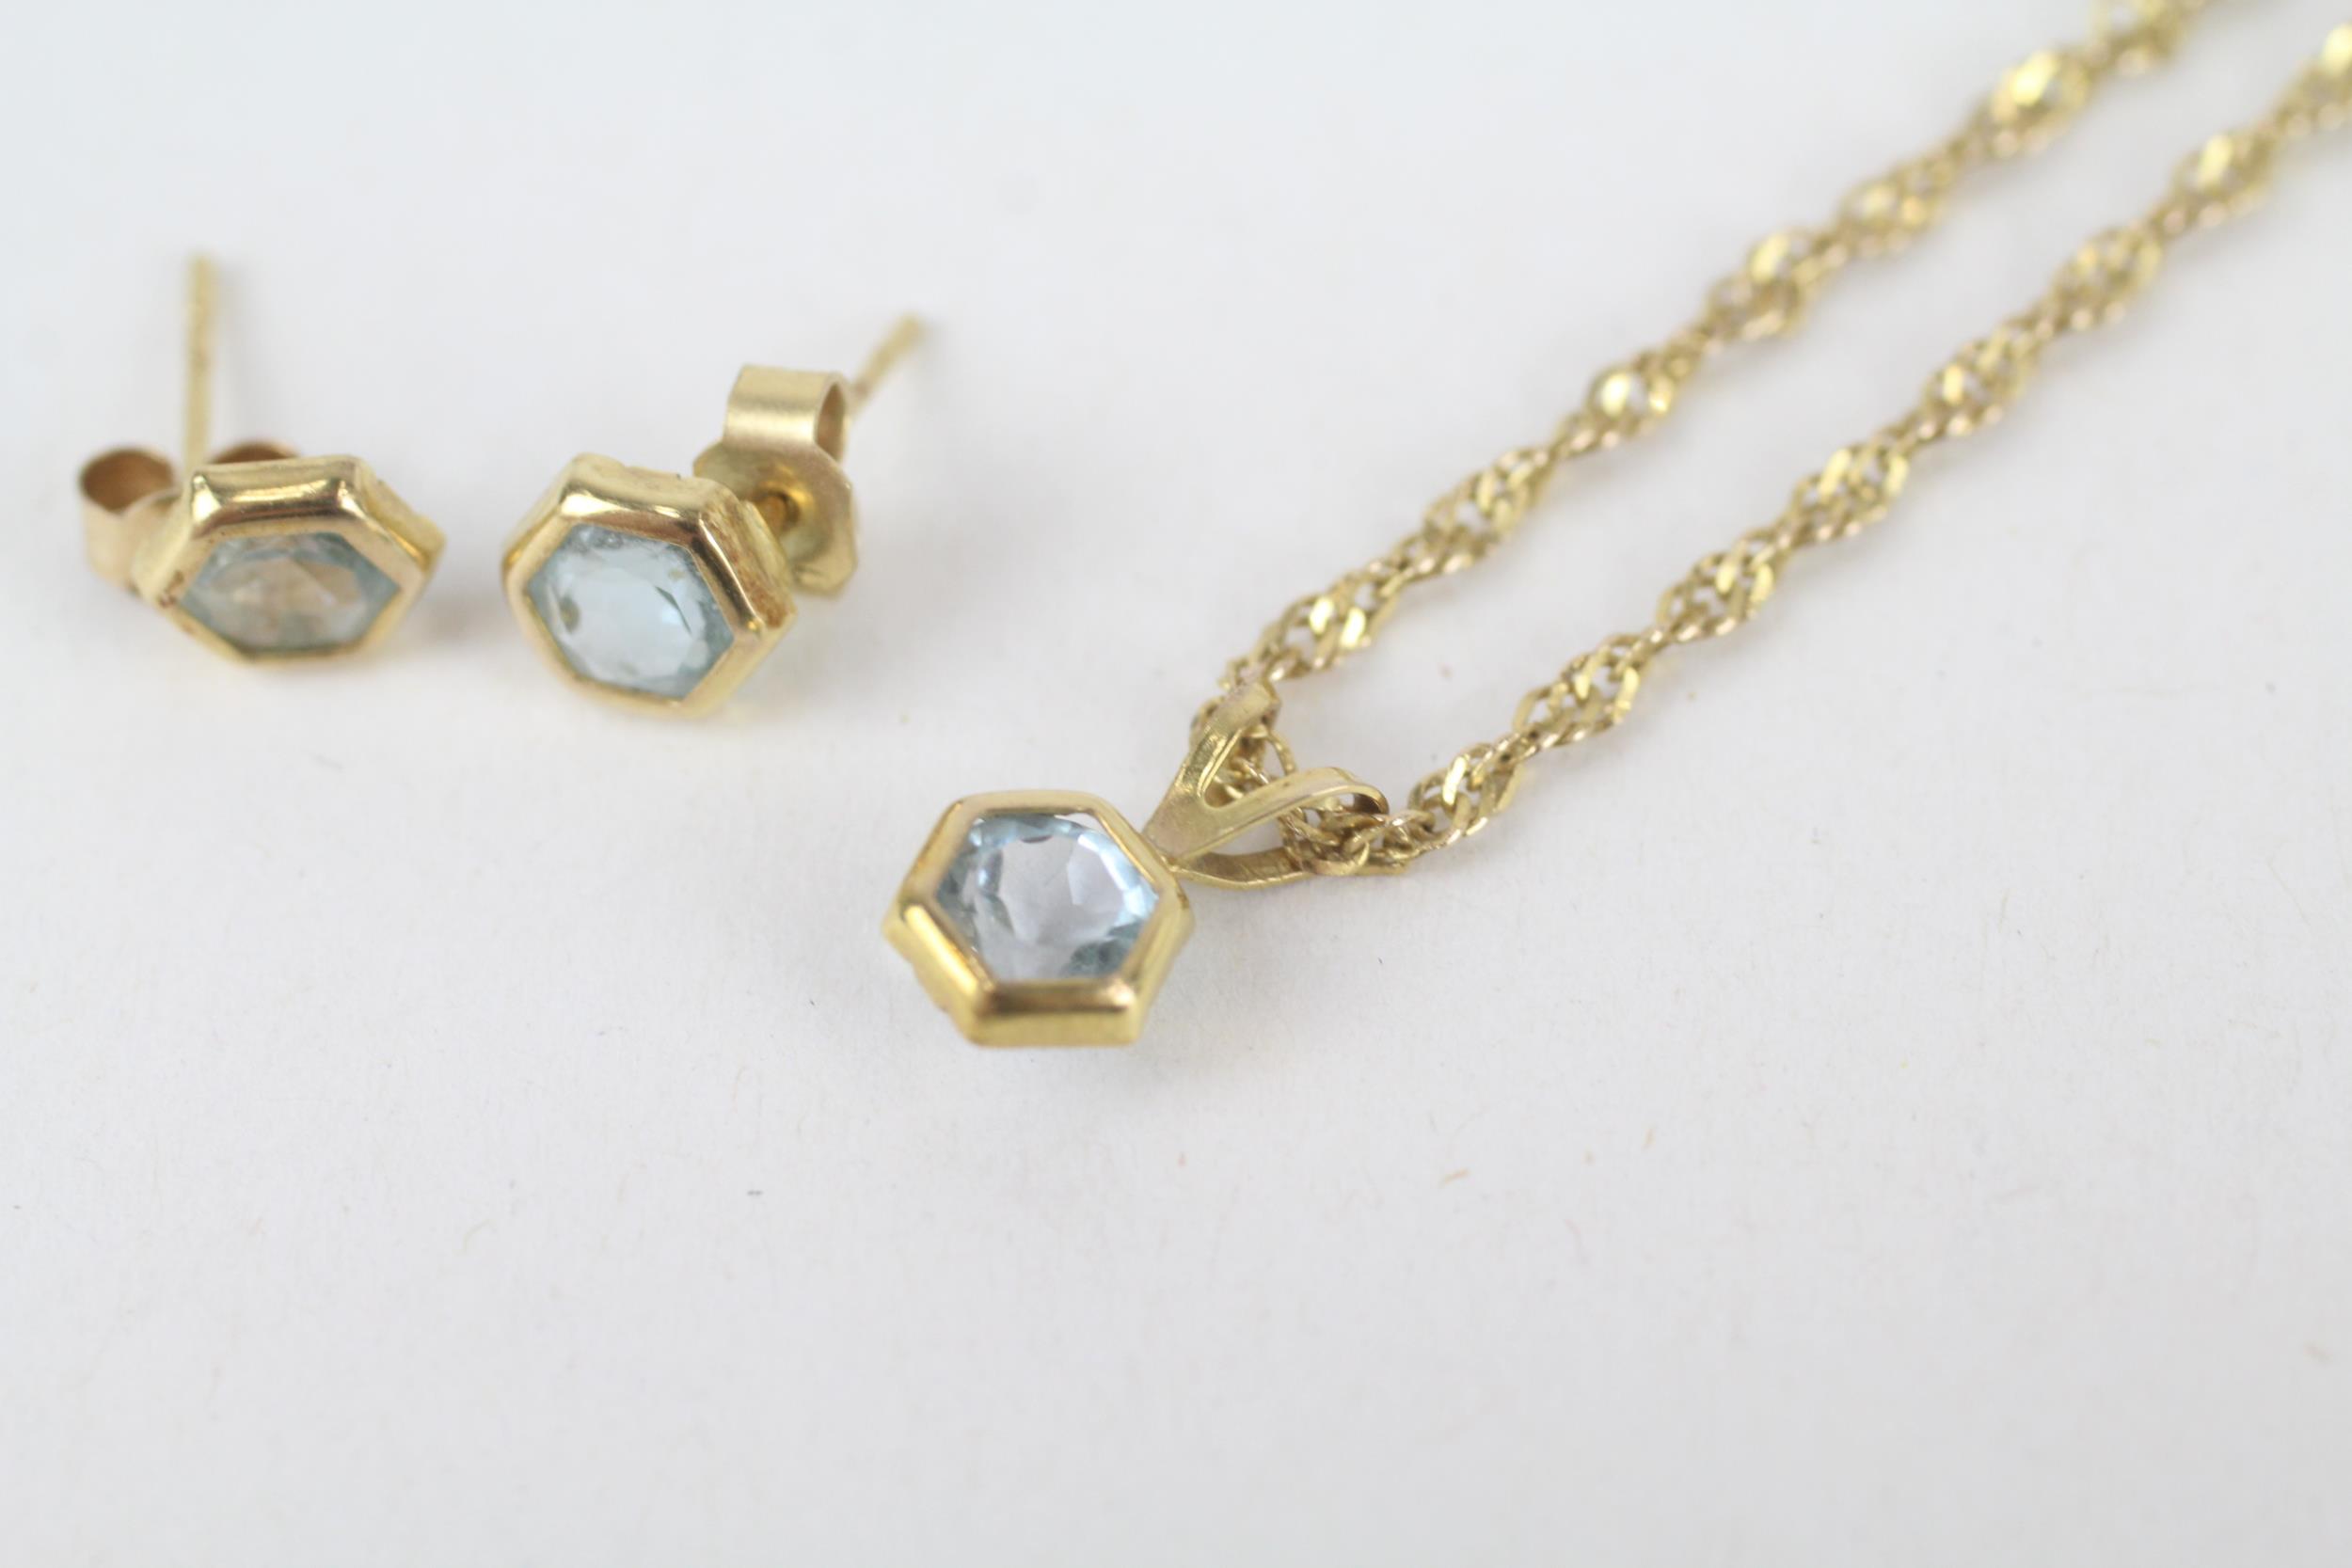 2x 9ct gold hexagon cut blue topaz necklace & stud earrings 2.6 g - Image 4 of 5